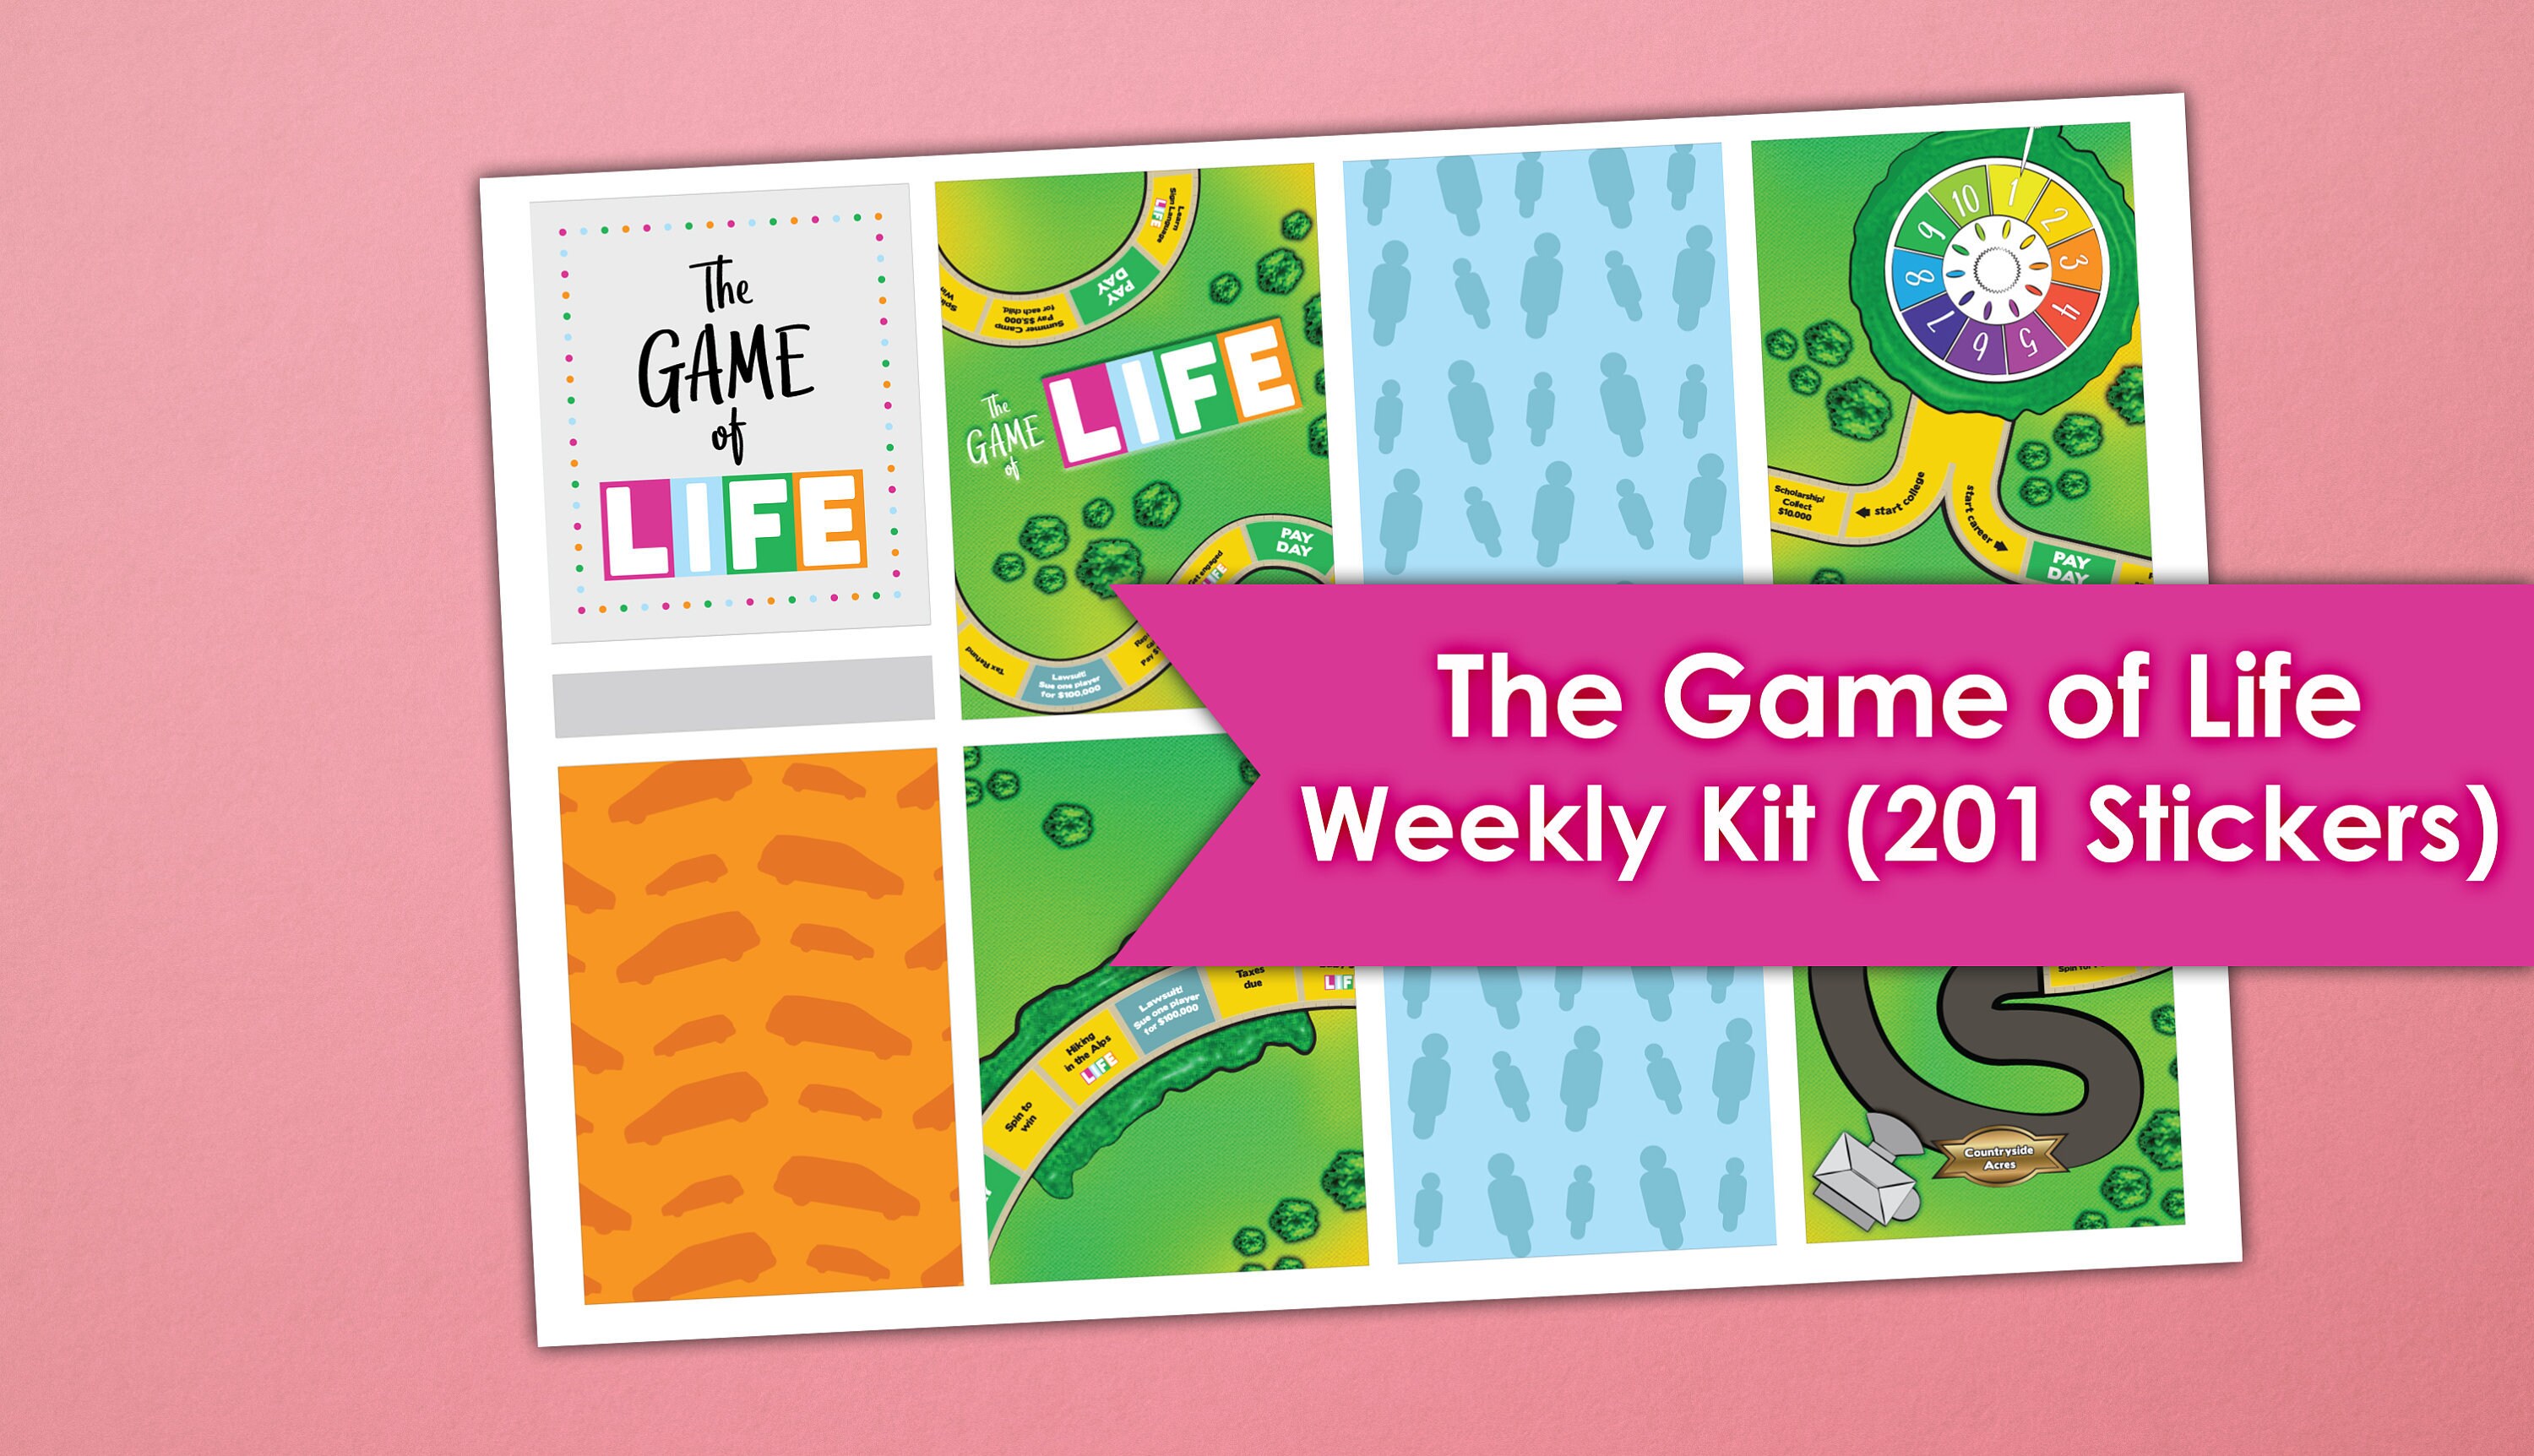 Customizable Game of Life Template by Loquacious Learning